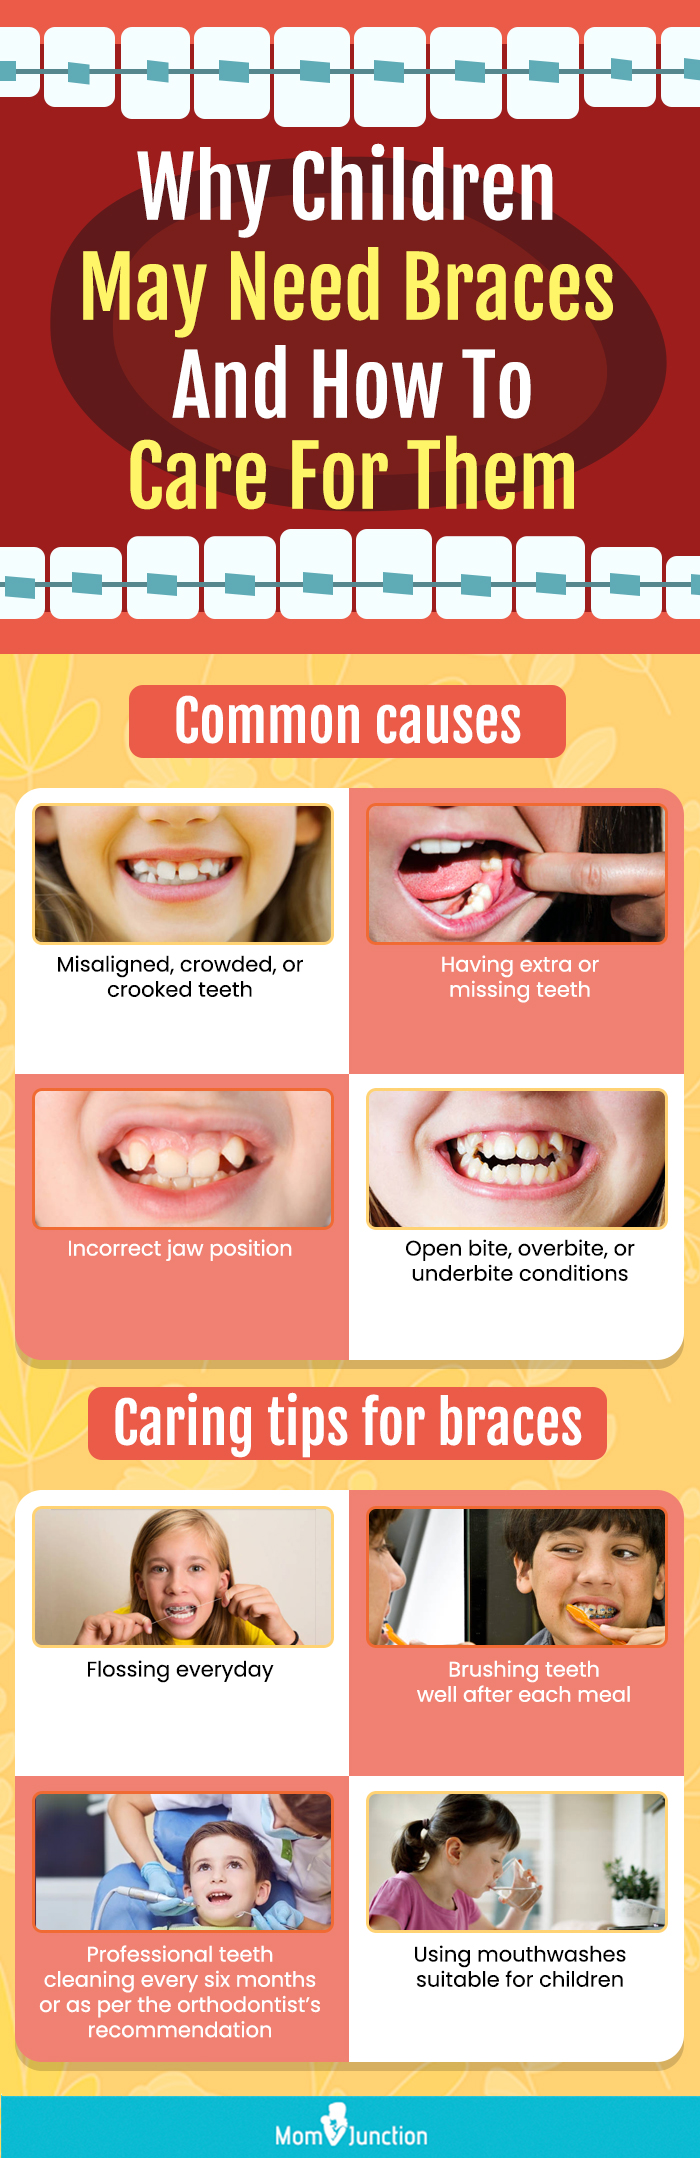 reasons why a child may need braces (infographic)